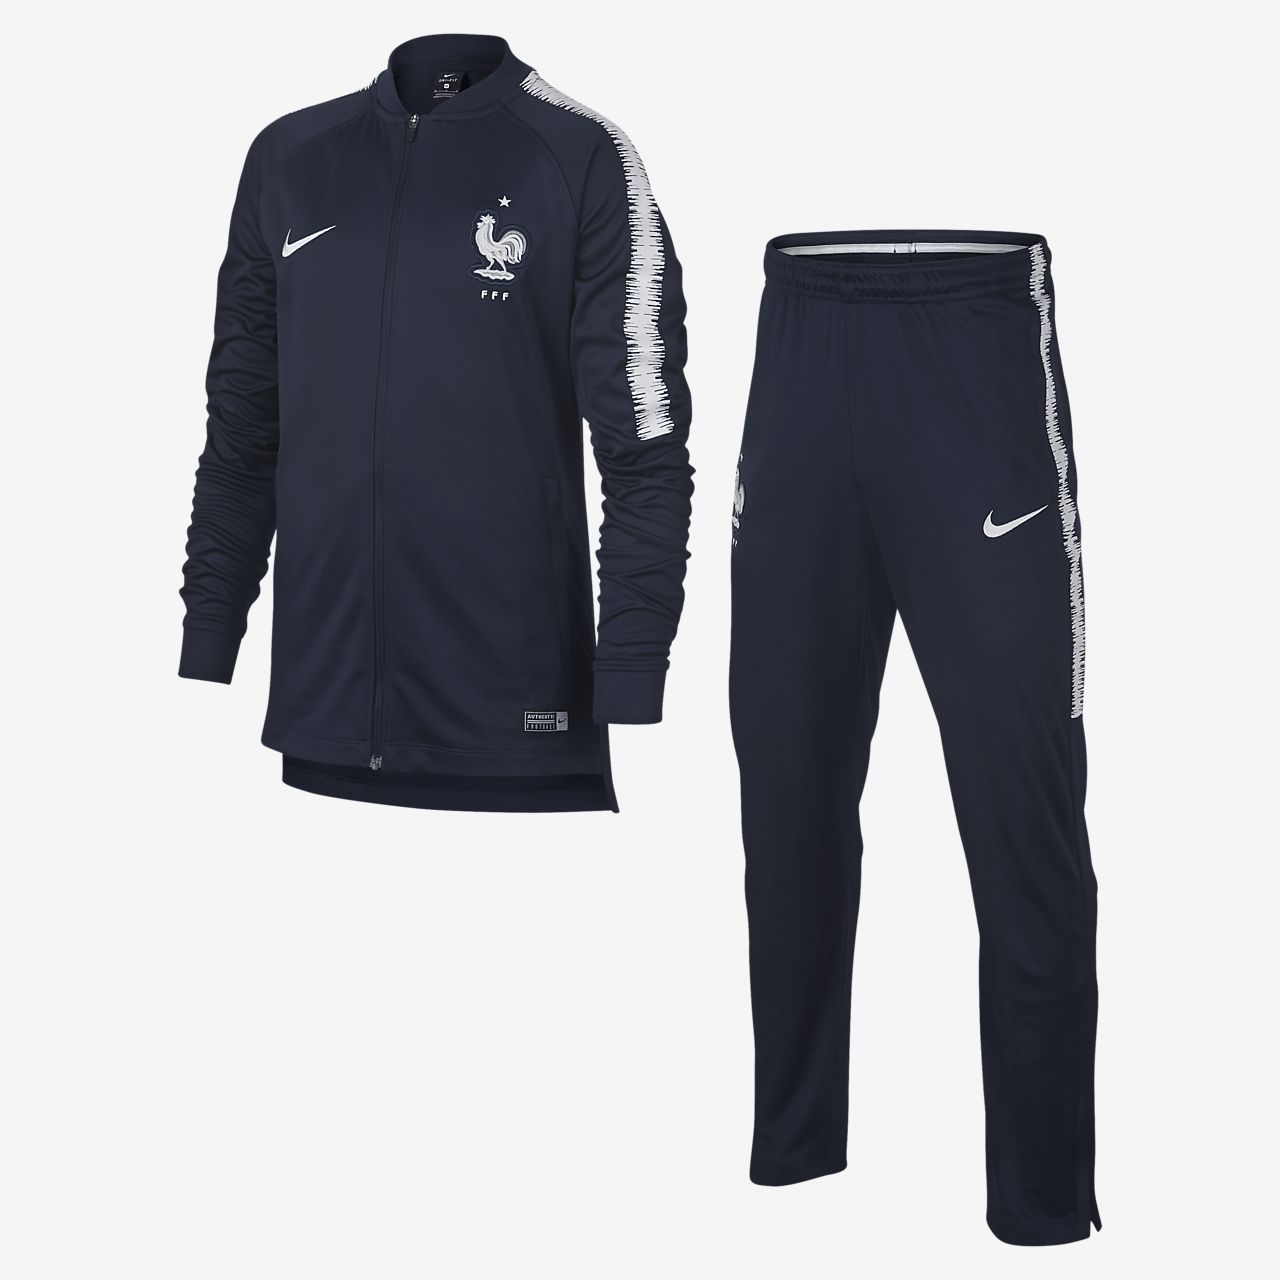 chandals nike 2019